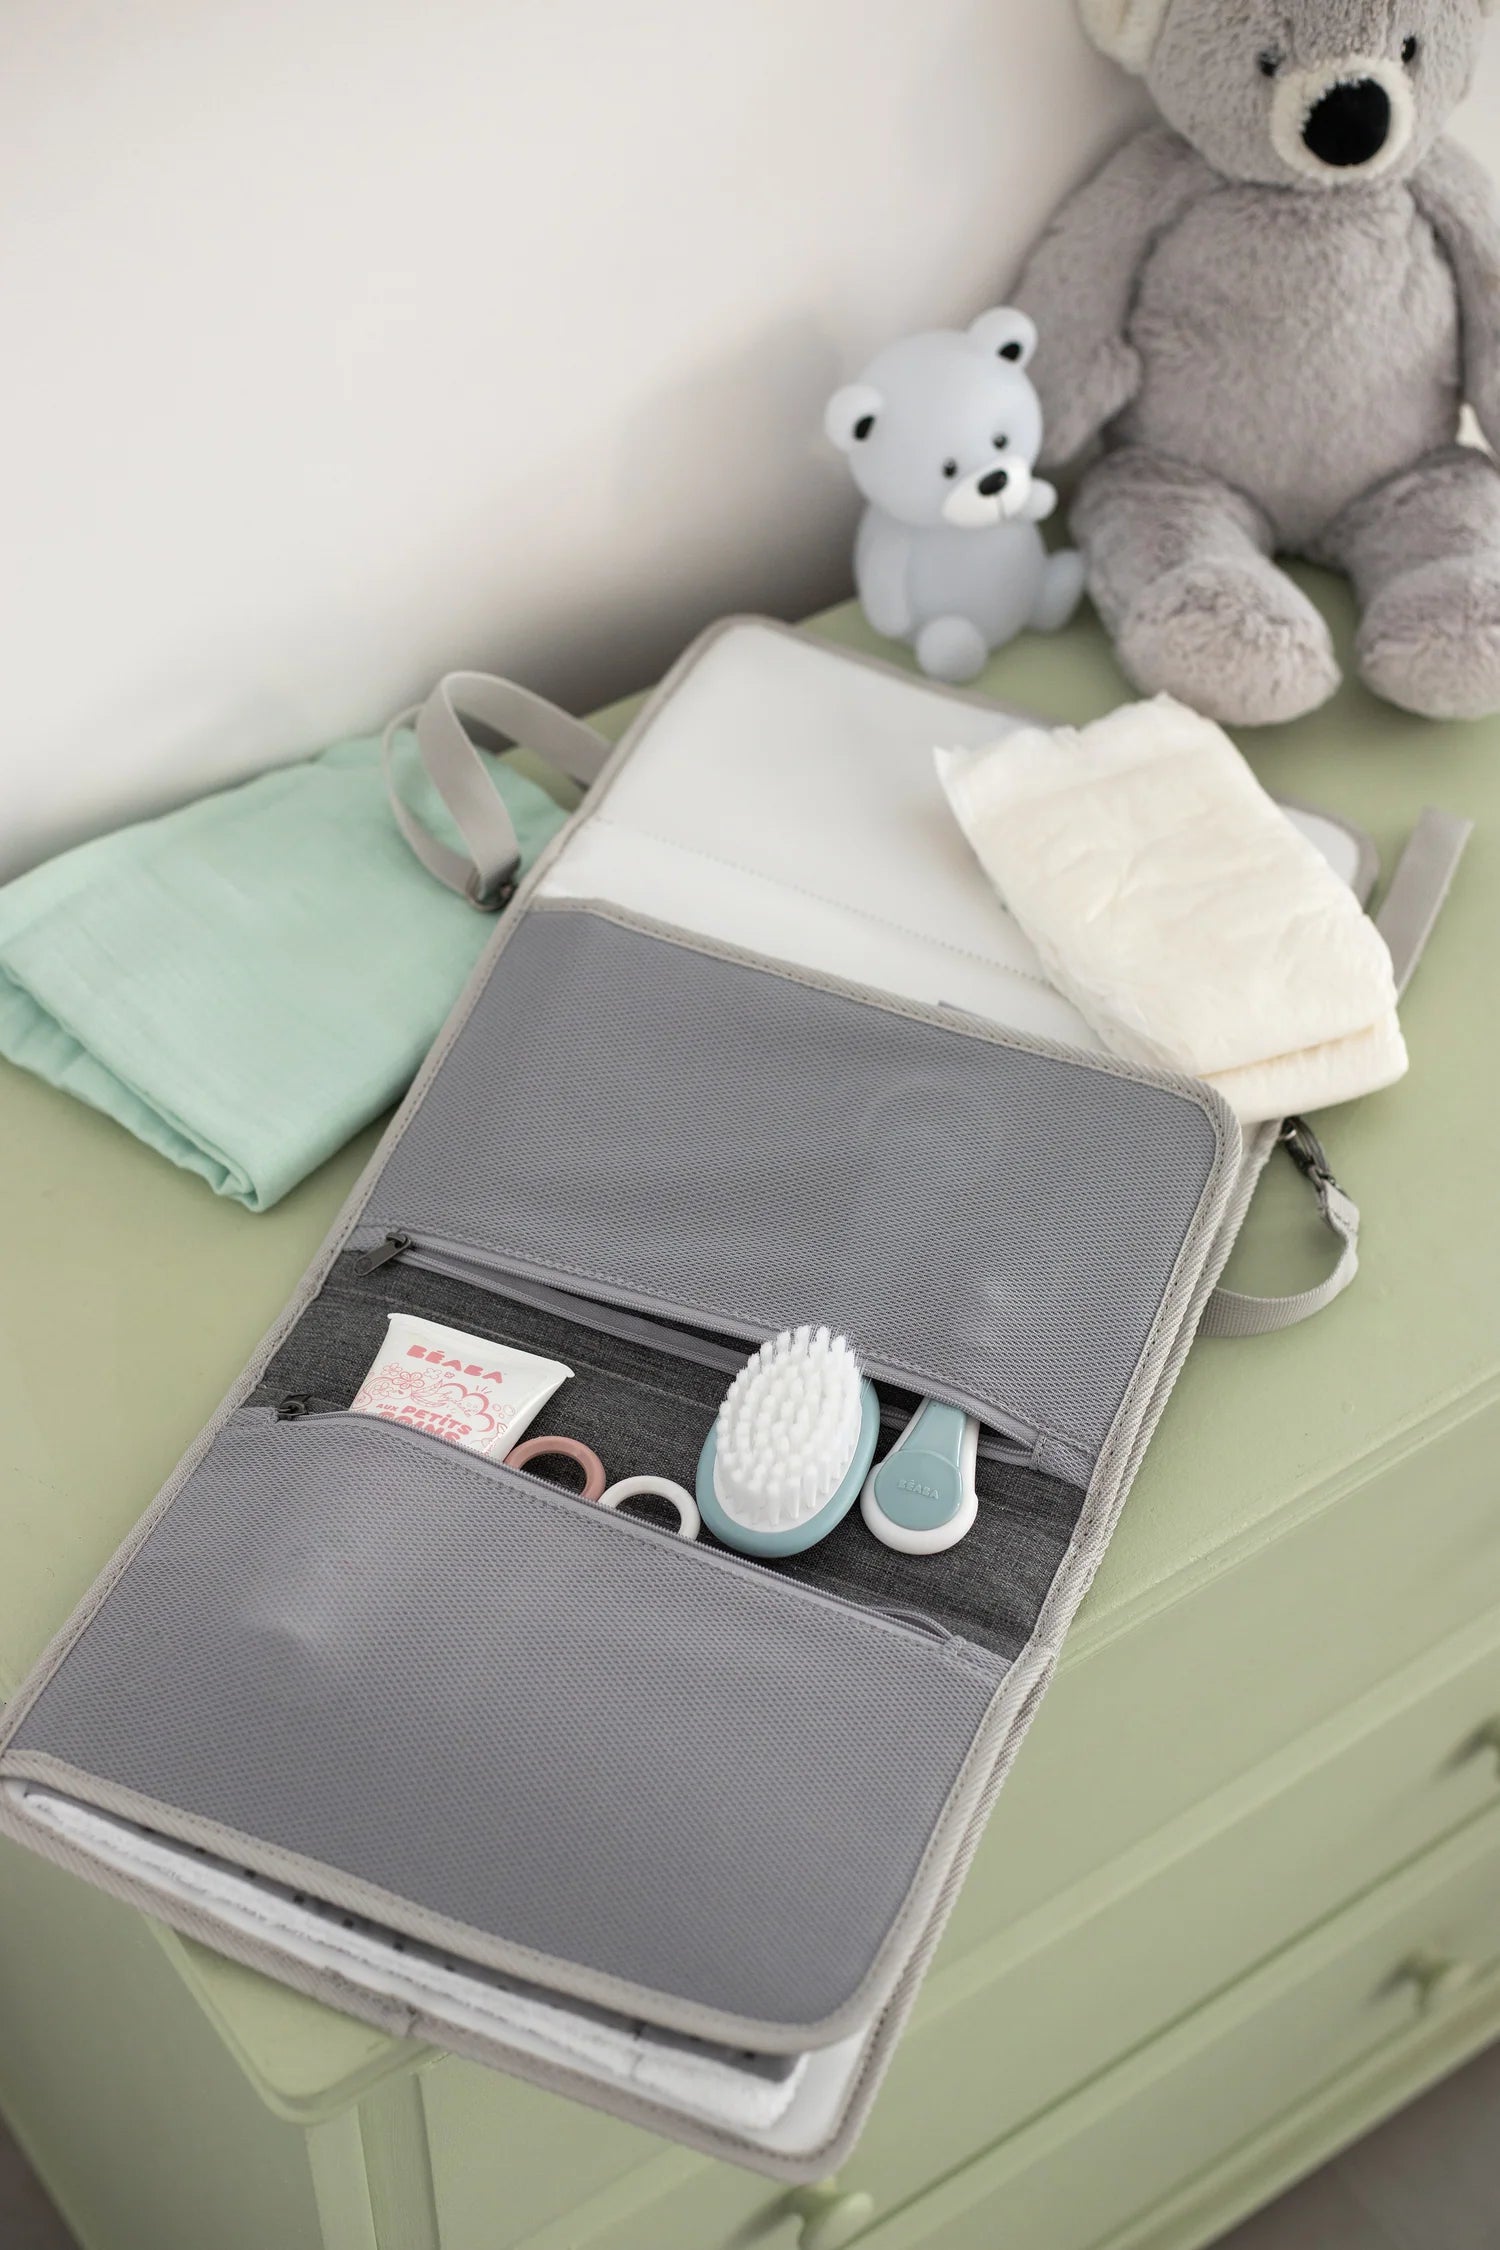 Beaba Changing Pouch - Heather Grey